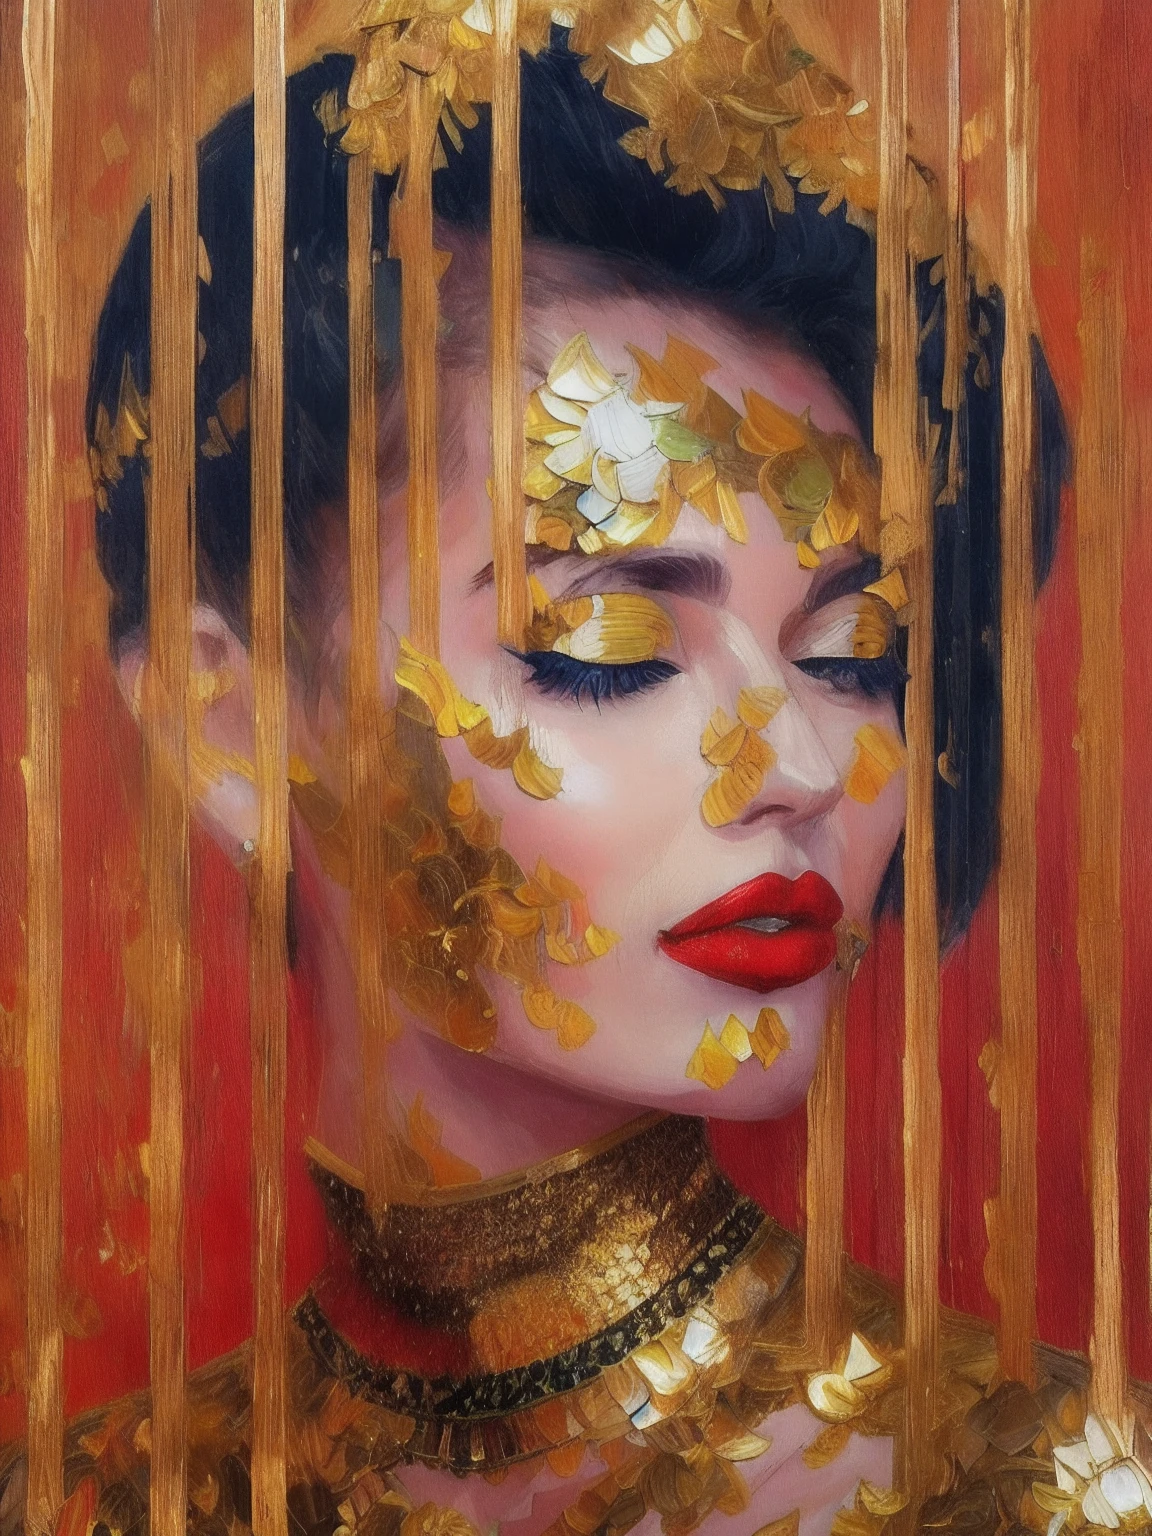 (portrait painting: 1), 1woman, mesmerizing red lips, (perfect jaw) stands in a golden glittery dress, dragon scales, gold jewelry necklace, black hair flowing down, confident stance and elegant pose accentuate beauty, detailed, oil painting, masterpiece